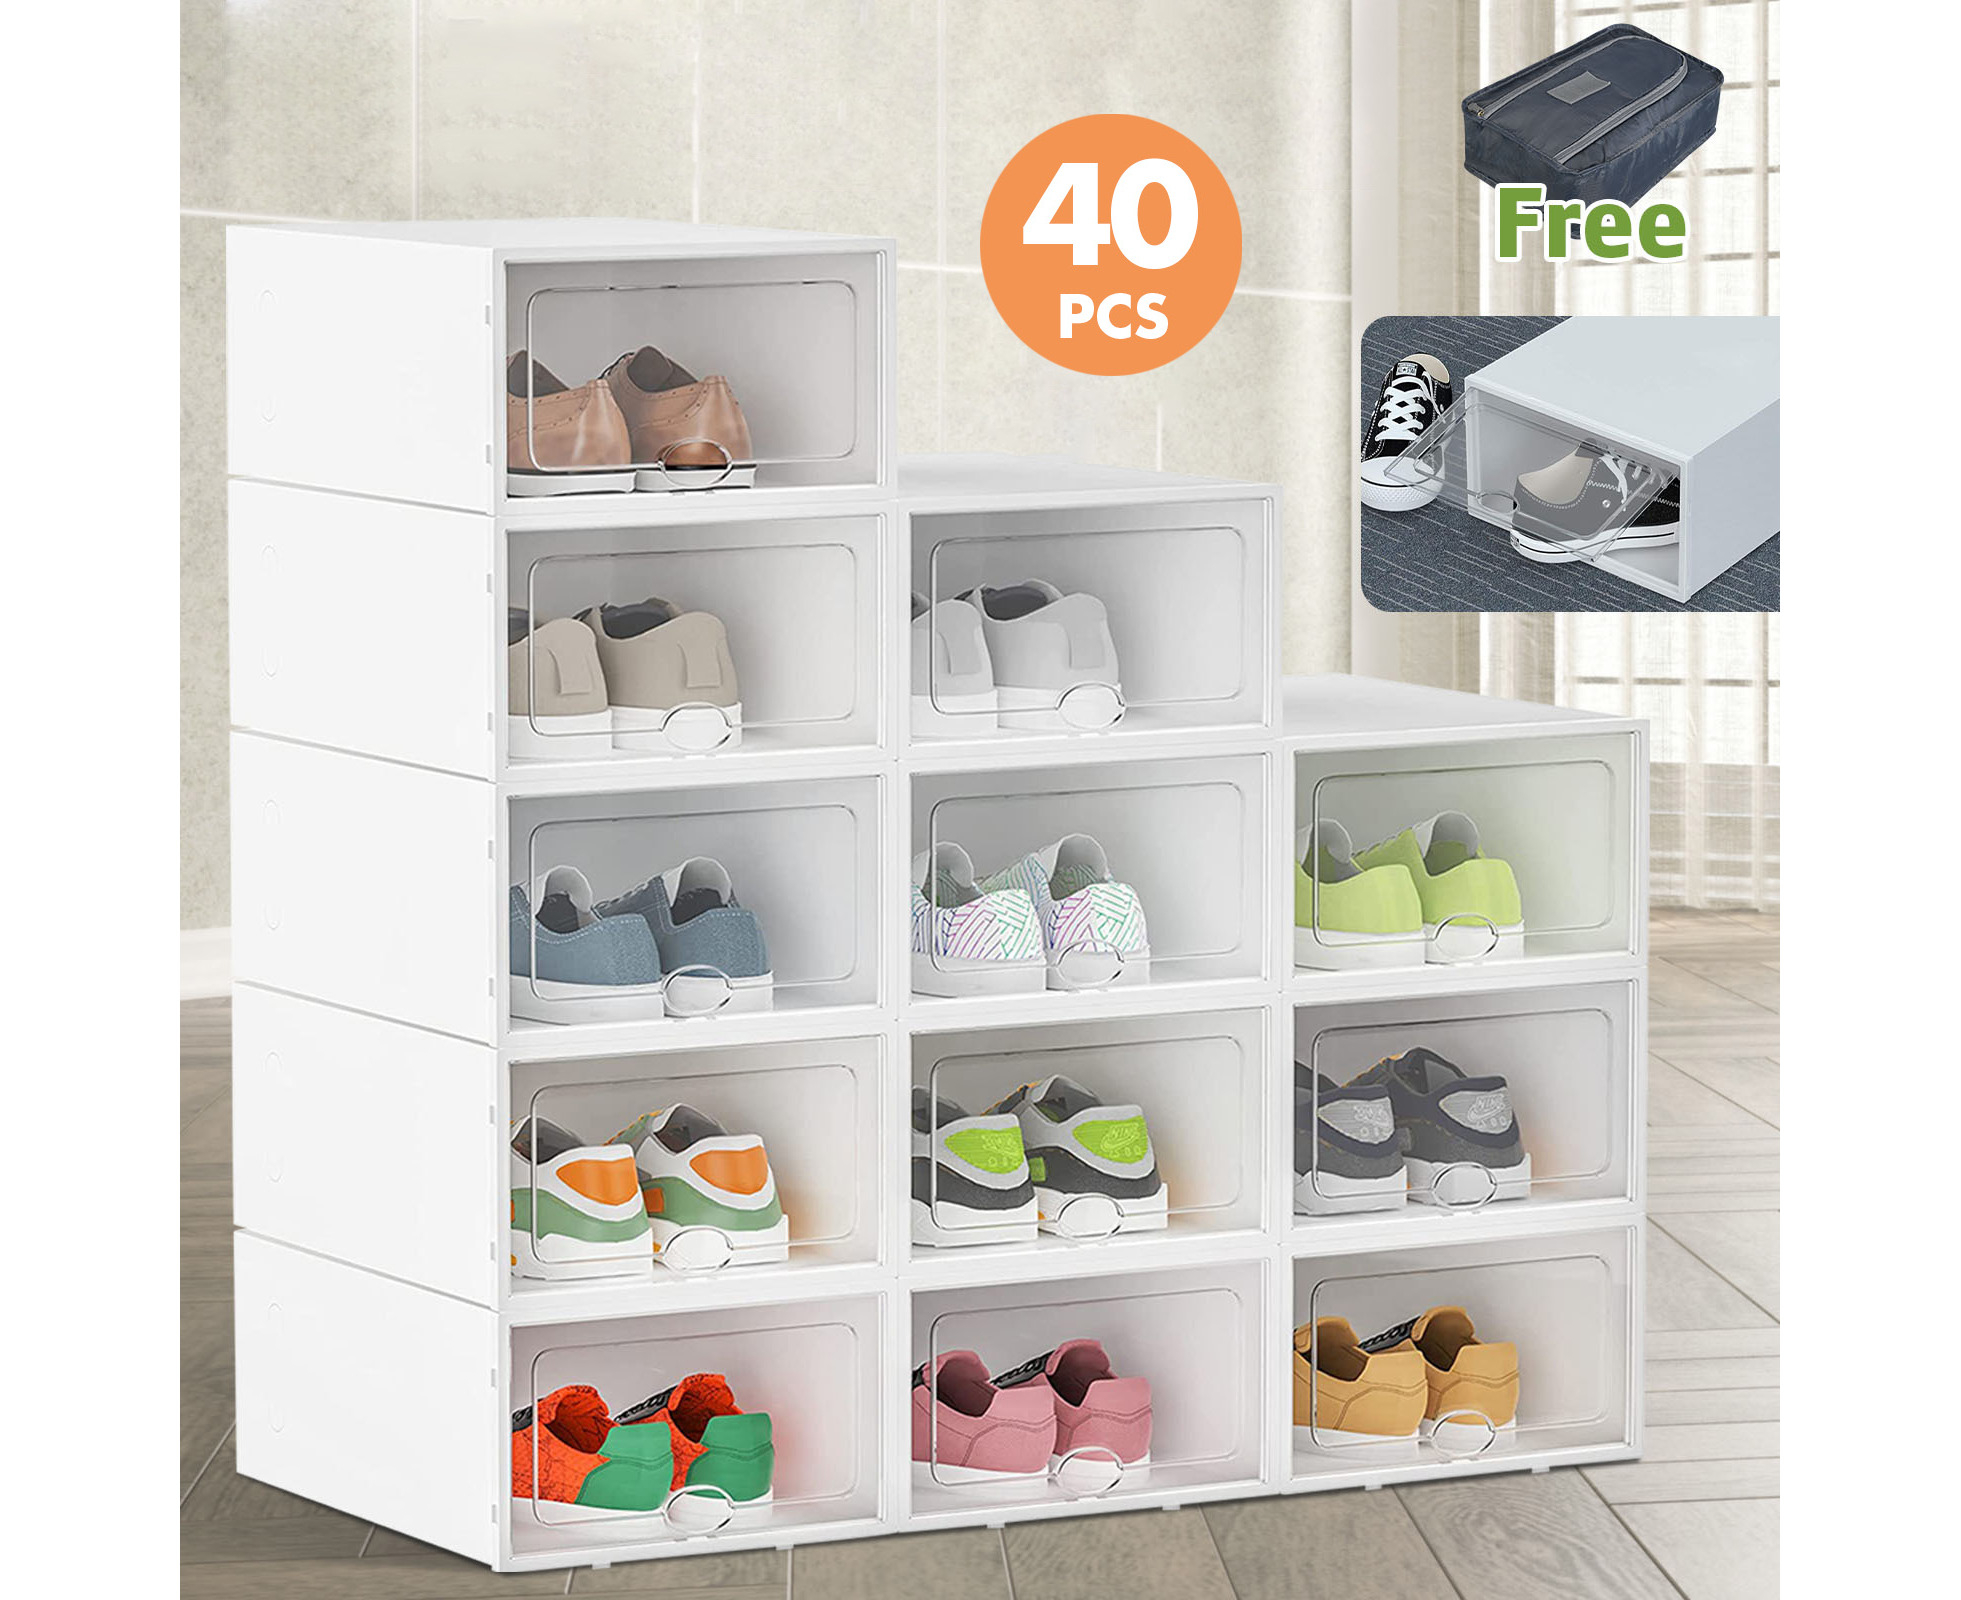 Mingerder Shoe Organizer Boxes Side Door Shoe Storages for Closet，12 Pack Shoe  Box Clear Plastic Stackable Can Connect Dustproof and Ventilated Debris  Storage B… | Shoe organizer, Closet shoe storage, Organization boxes